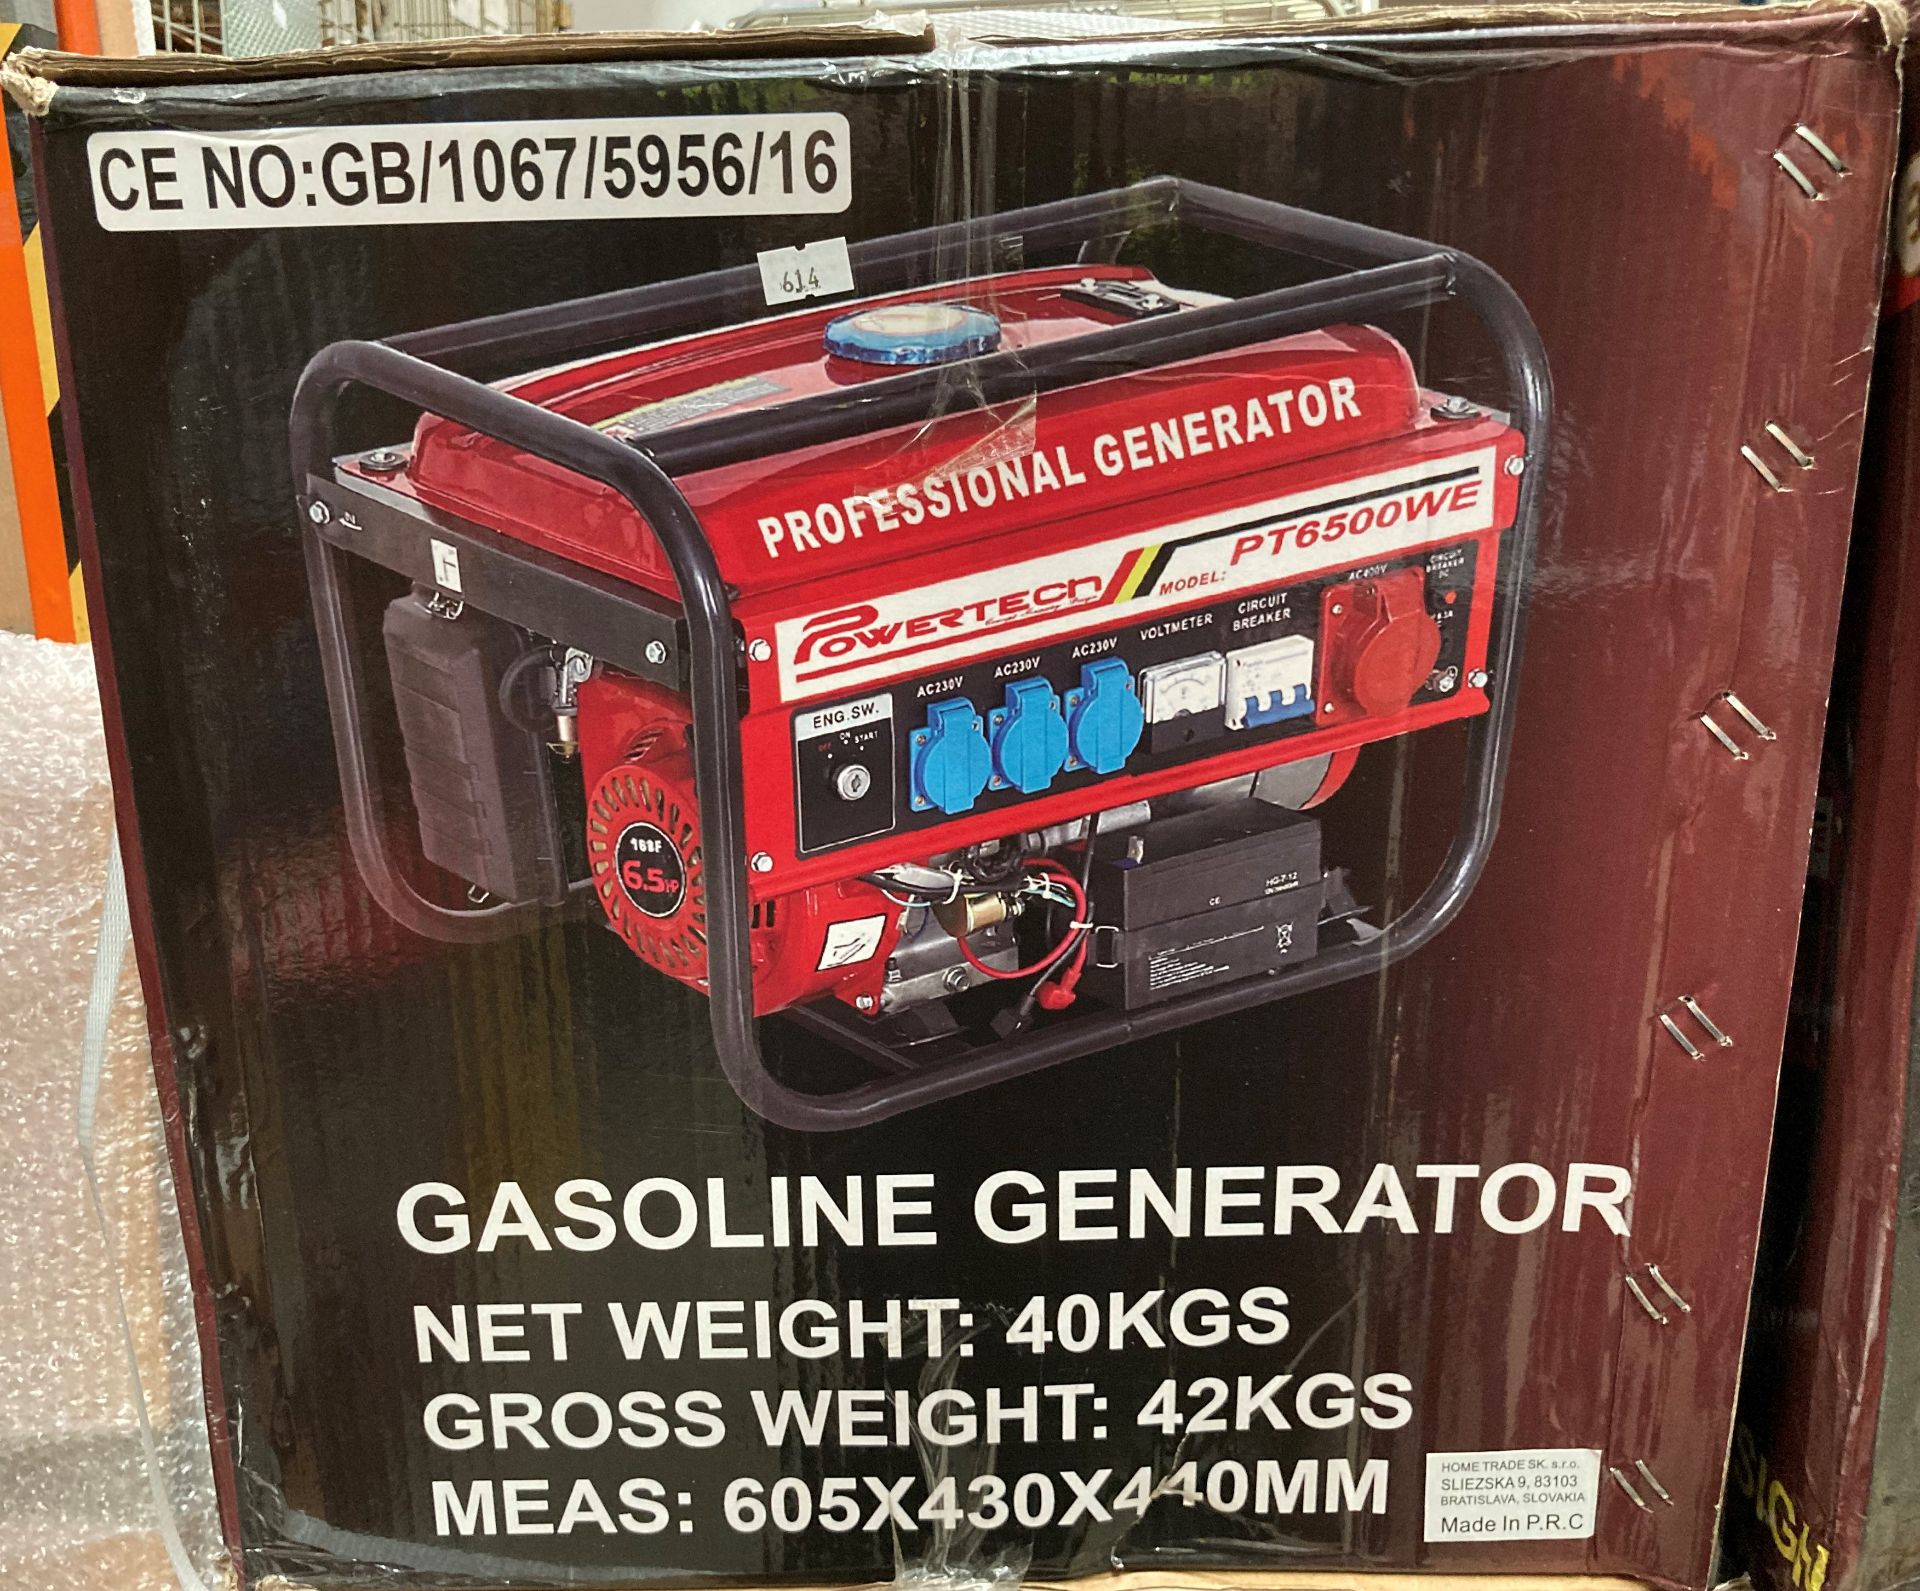 POWER TECH PT6500WE portable professional generator - rated out put 6000w, gross weight 42kg, - Image 2 of 2